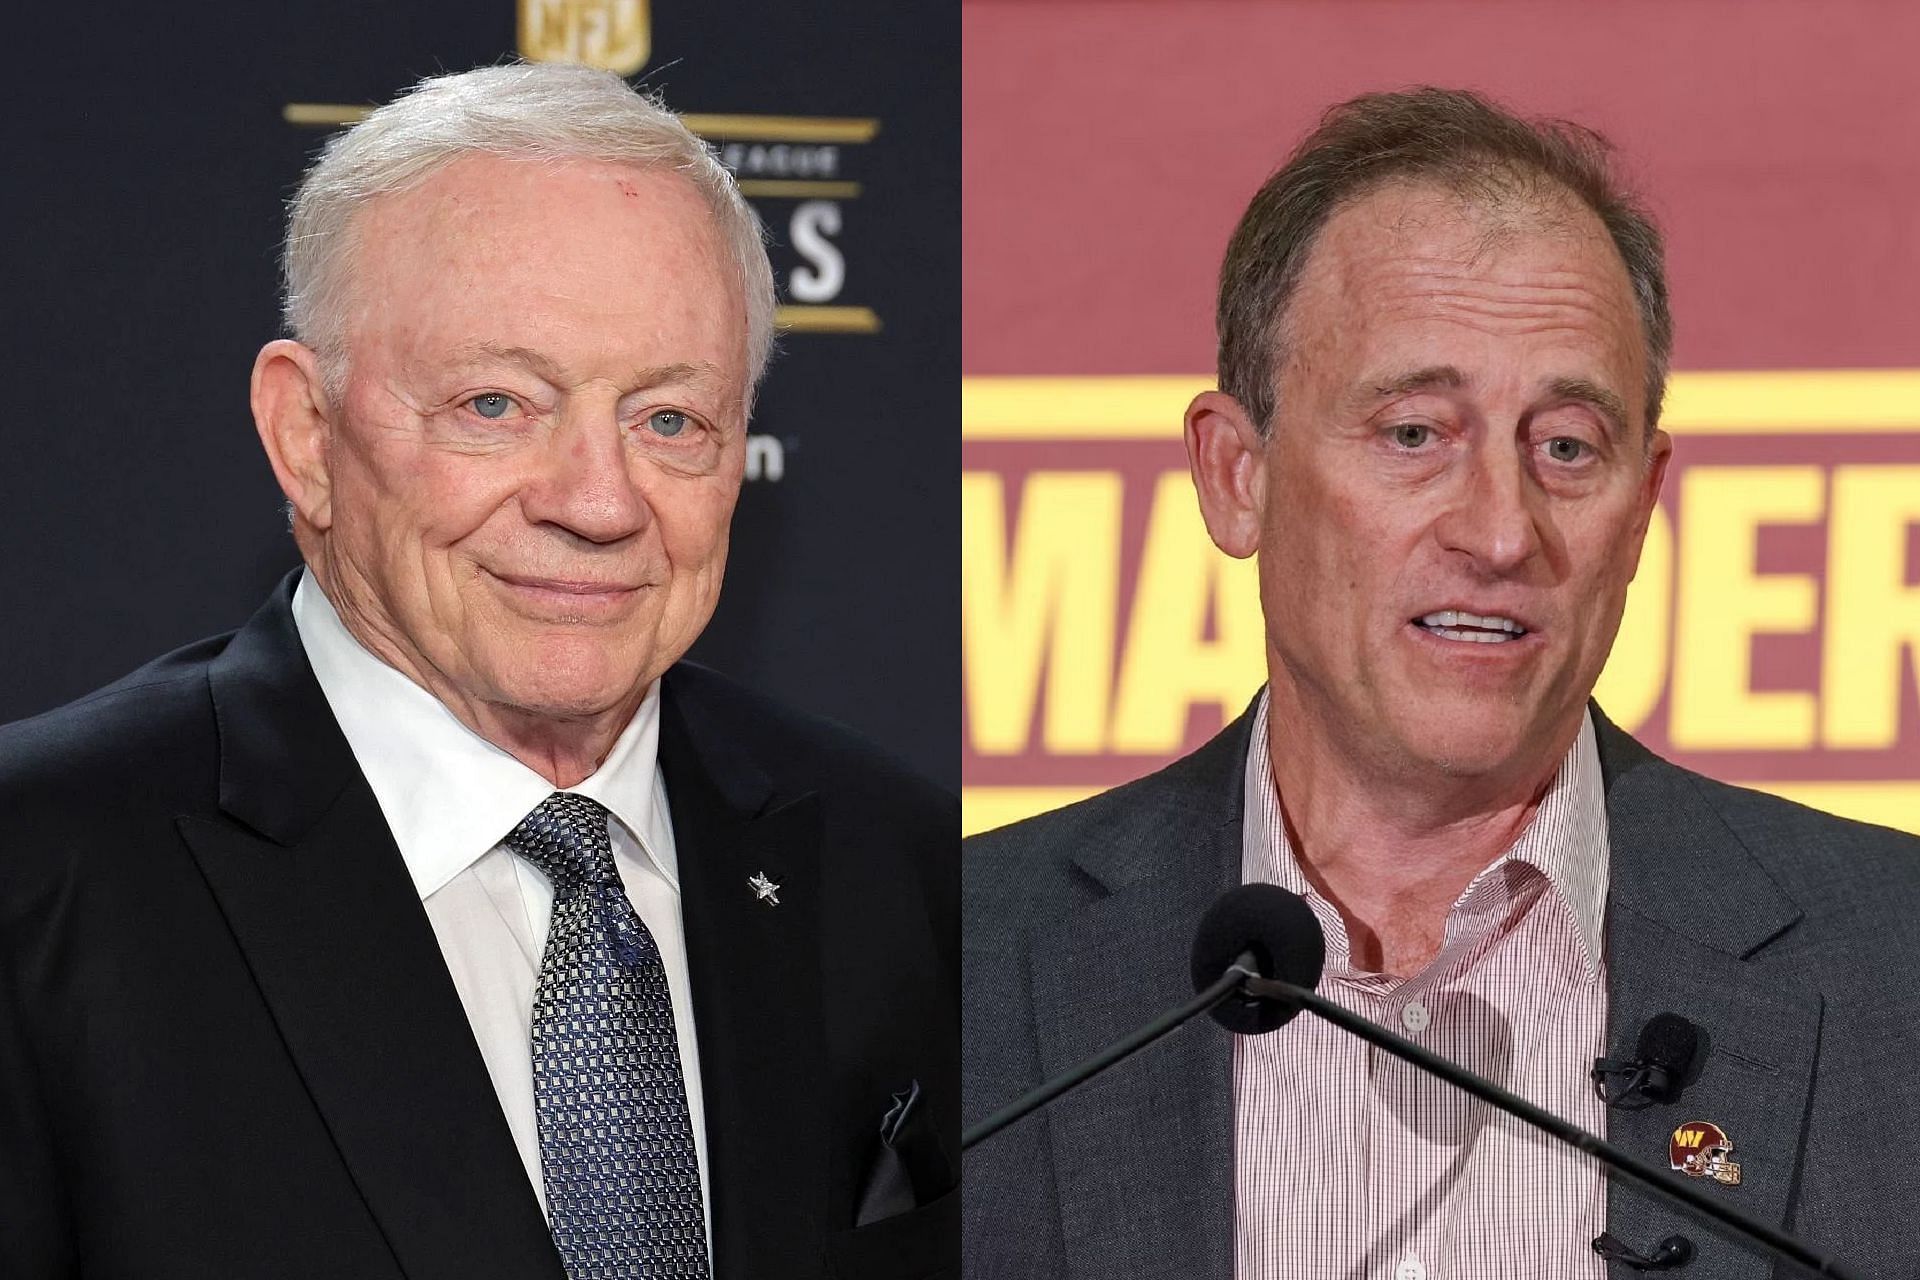 Josh Harris takes shot at Jerry Jones&rsquo; Cowboys in introductory press after $6,050,000,000 purchase of Commanders